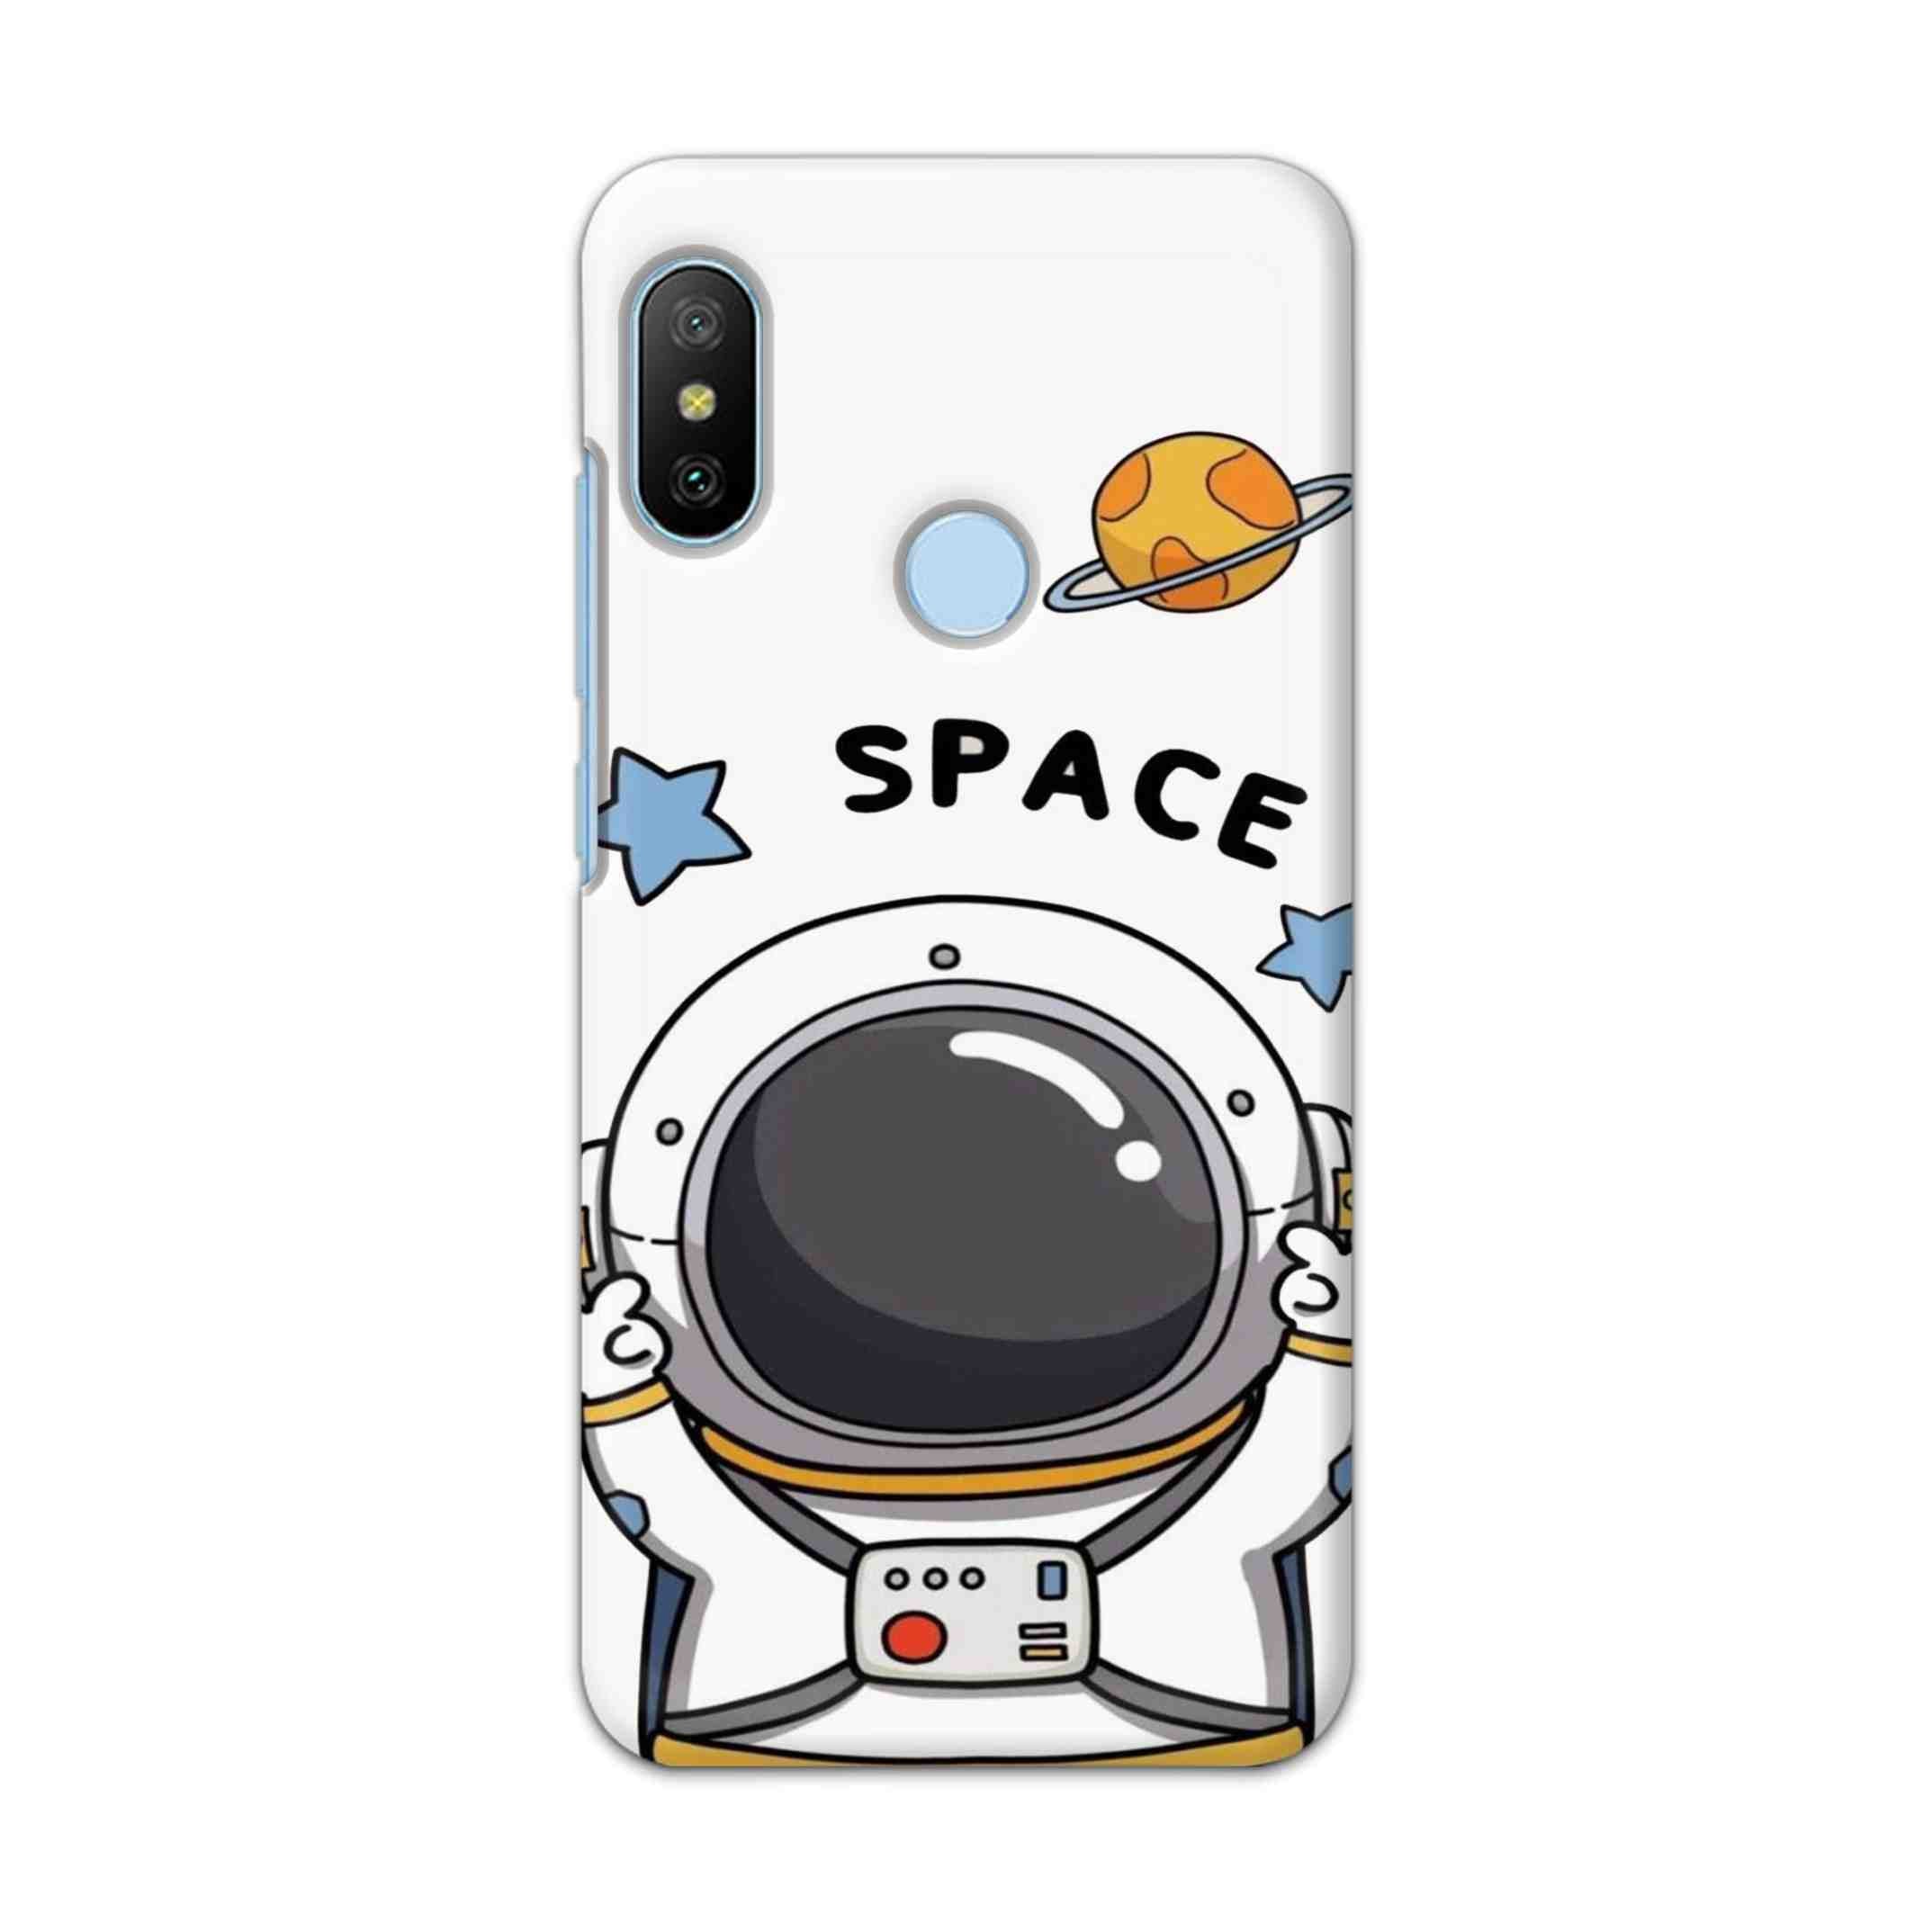 Buy Little Astranaut Hard Back Mobile Phone Case/Cover For Xiaomi Redmi 6 Pro Online